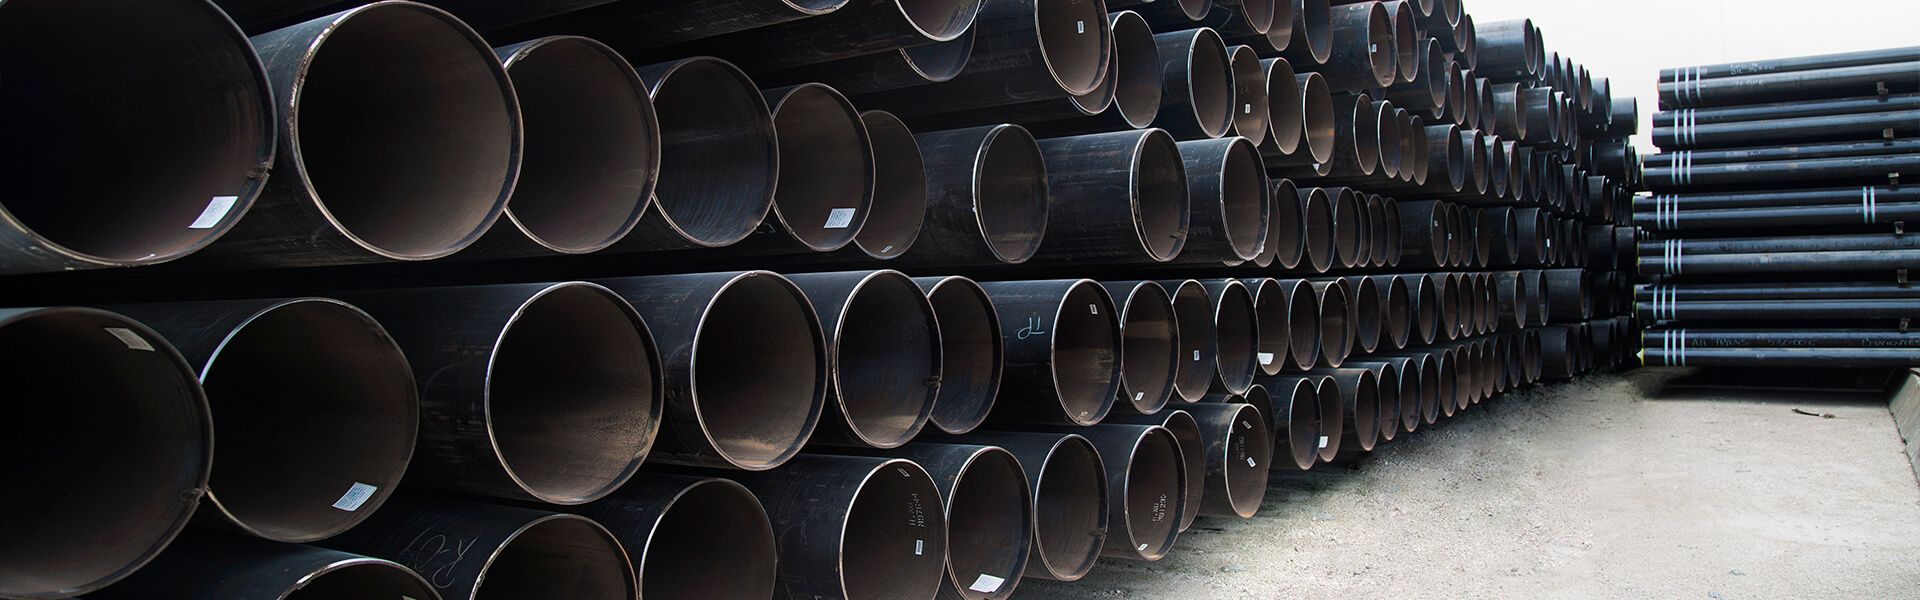 Large stacks of carbon steel pipe in a distribution yard.